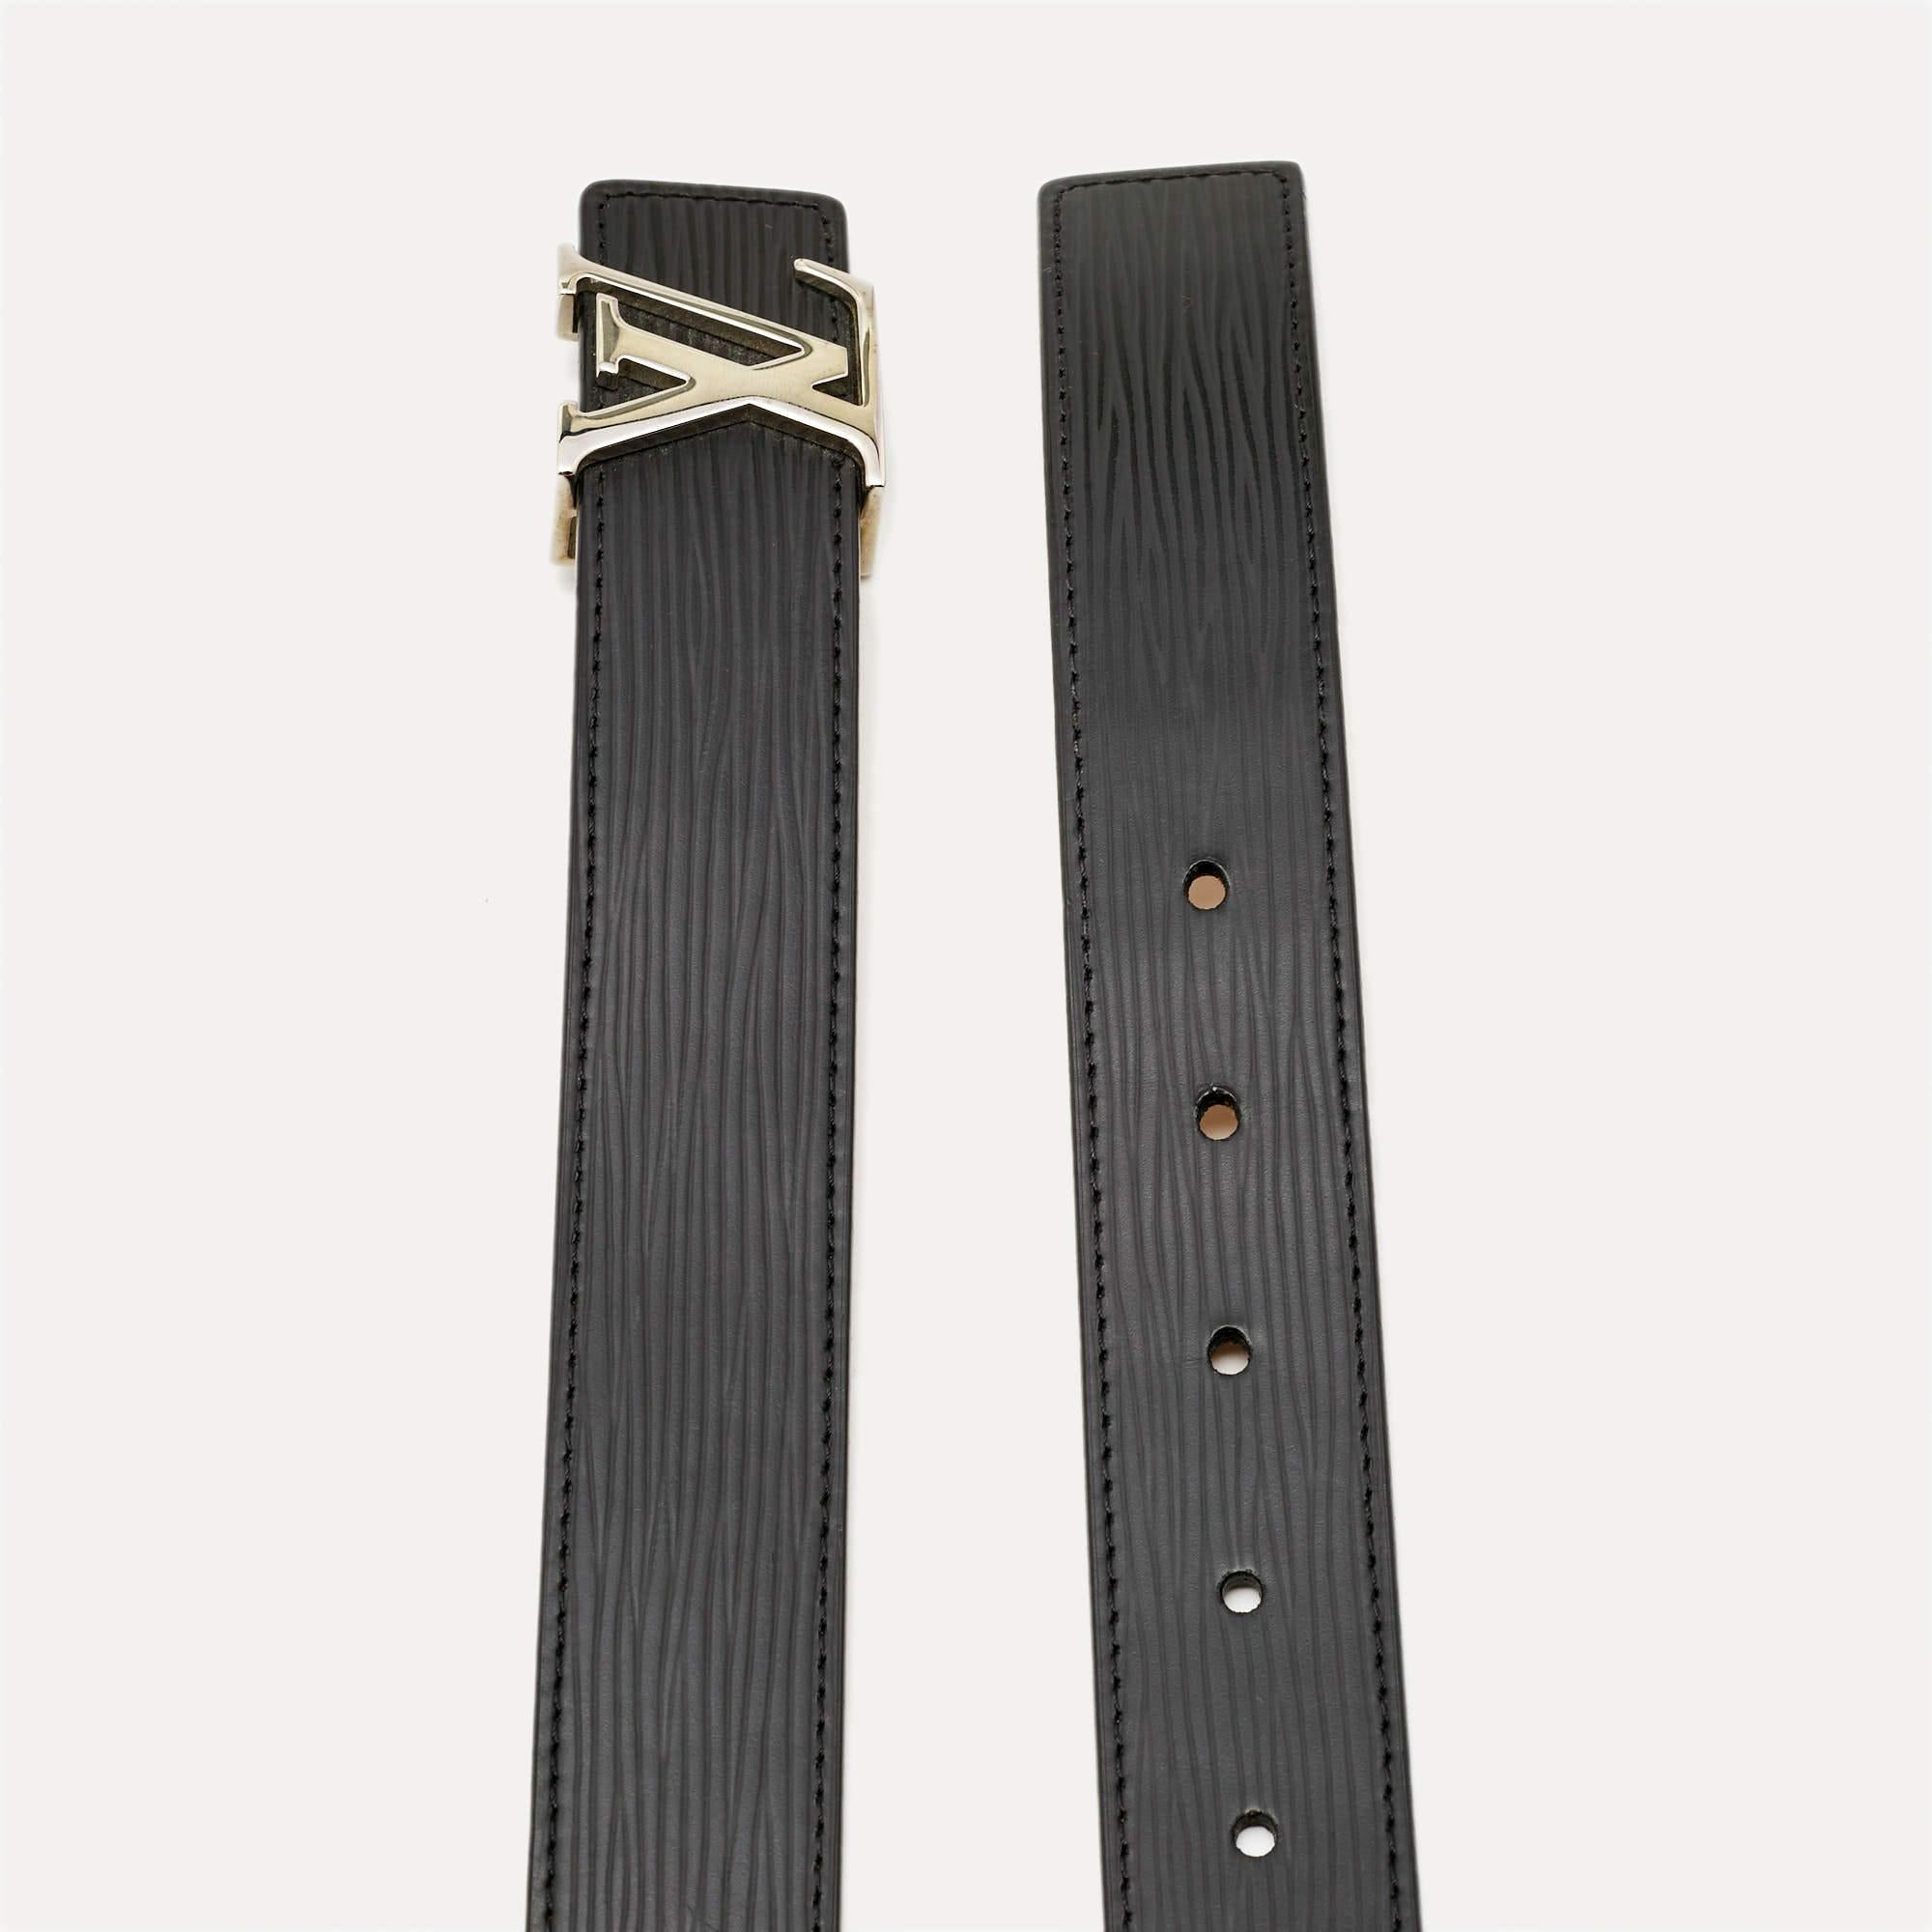 This Initiales belt from Louis Vuitton is simple in design but instantly recognizable as luxury. The Epi leather belt has a buckle in the form of an enlarged LV symbol in silver-tone metal.

Includes: Original Dustbag, Original Box

